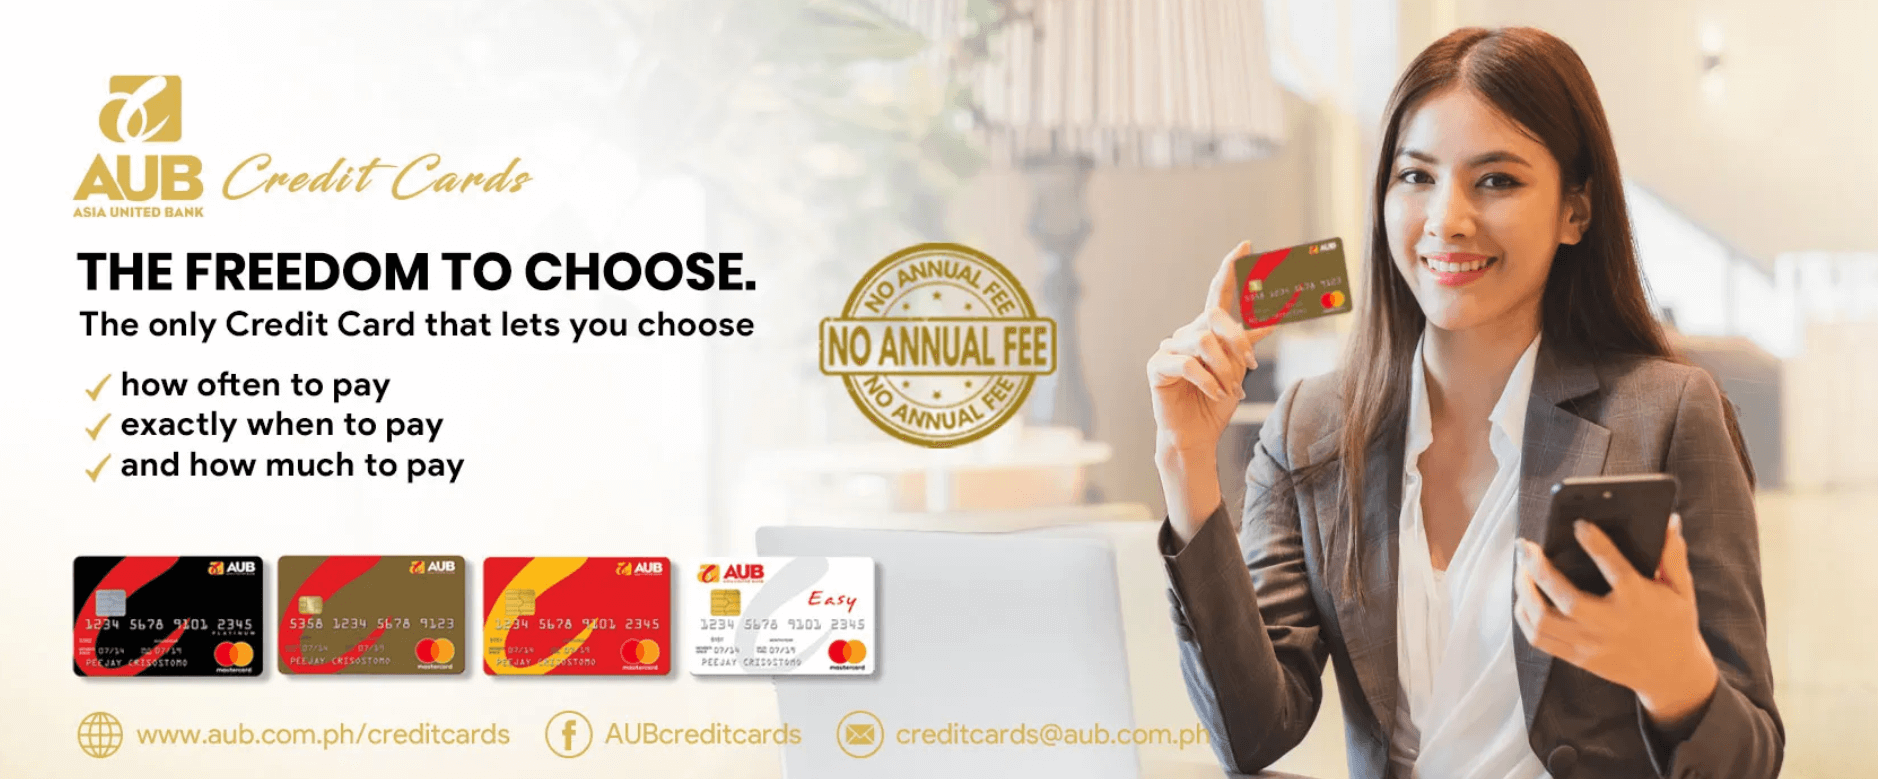 Asia united bank credit cards